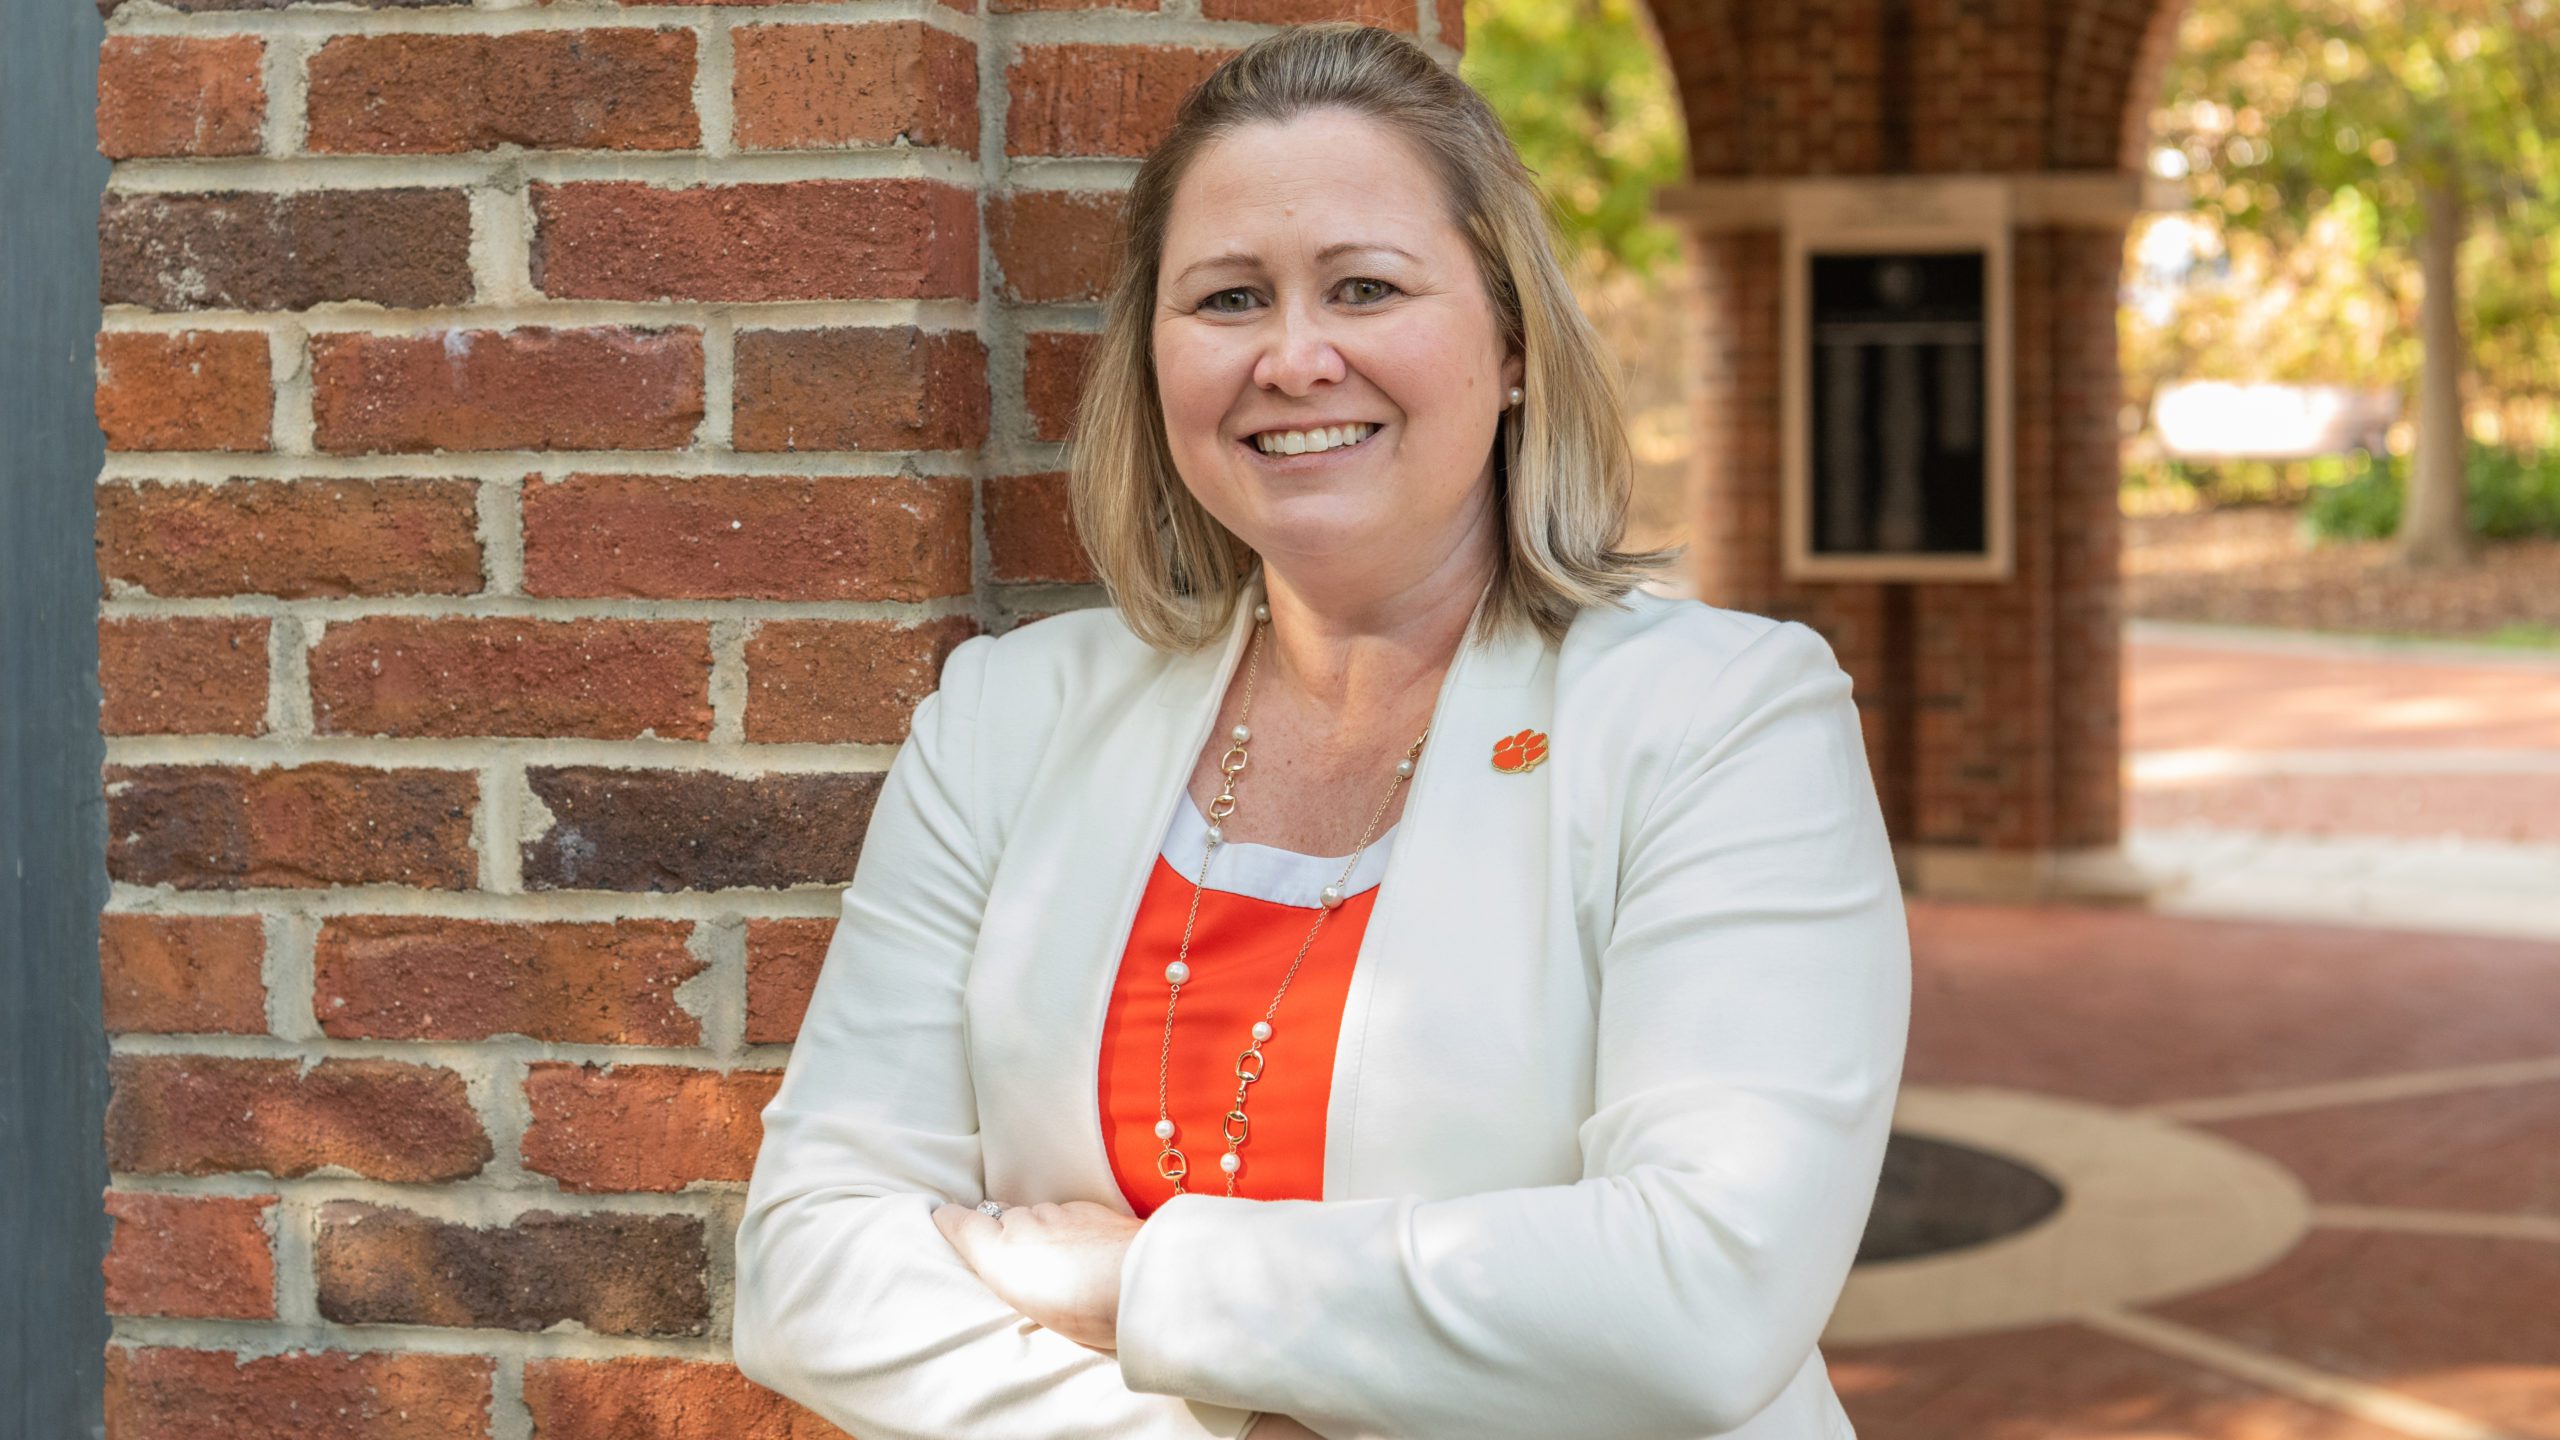 Kristin Walker-Donnelly, director of assessment in the Division of Student Affairs, was one of several staff members honored by the South Carolina College and Personnel Association